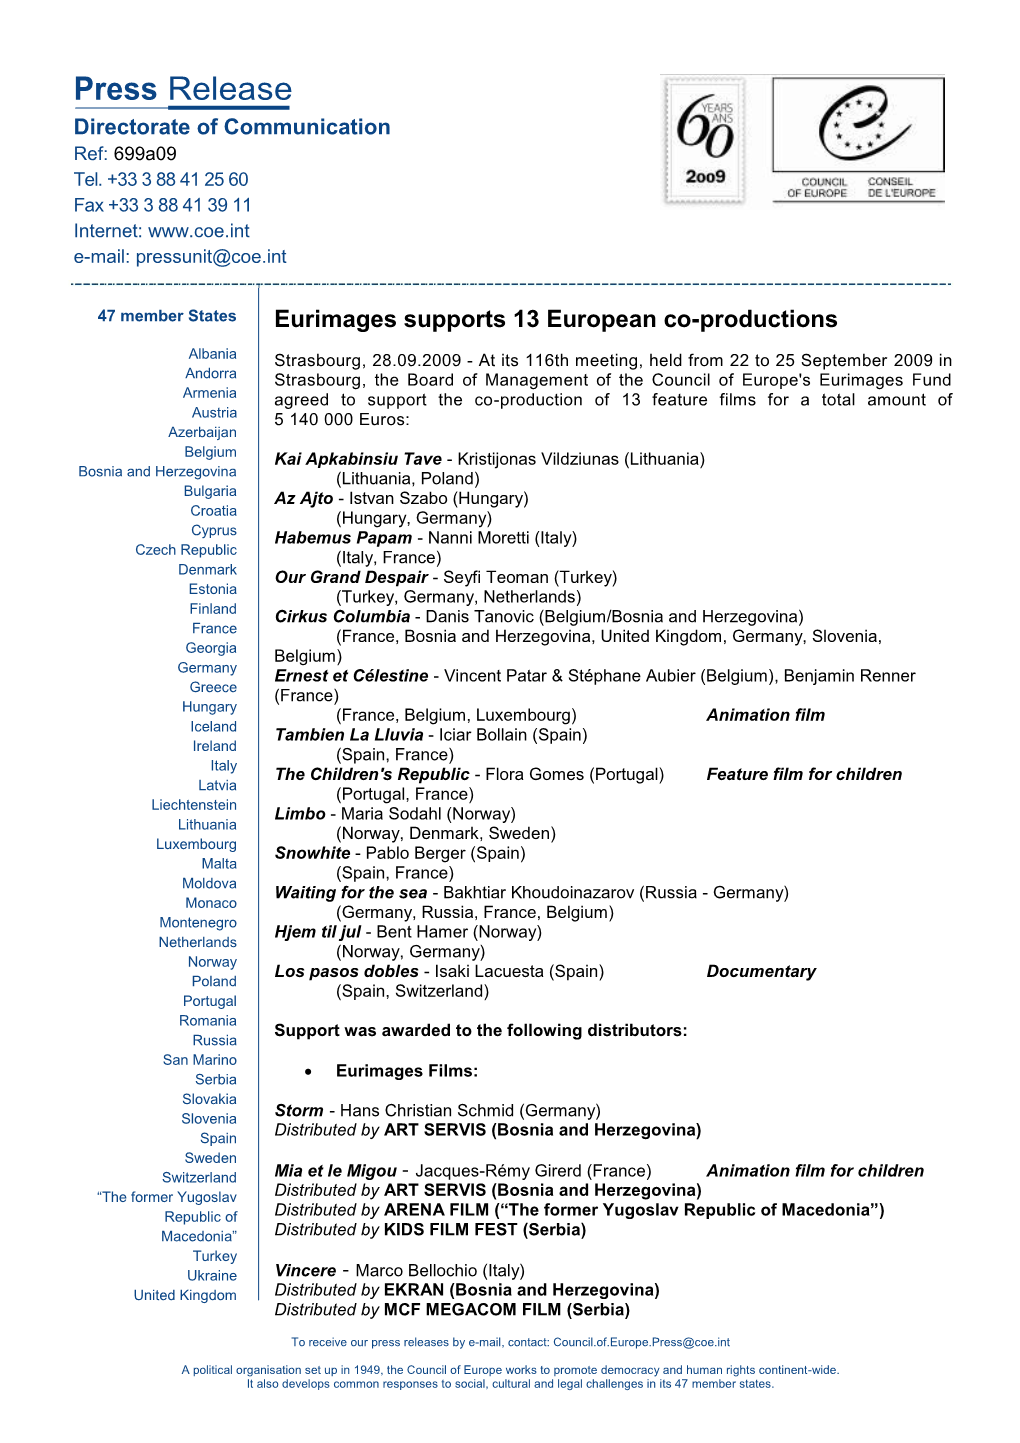 Eurimages Supports 13 European Co-Productions